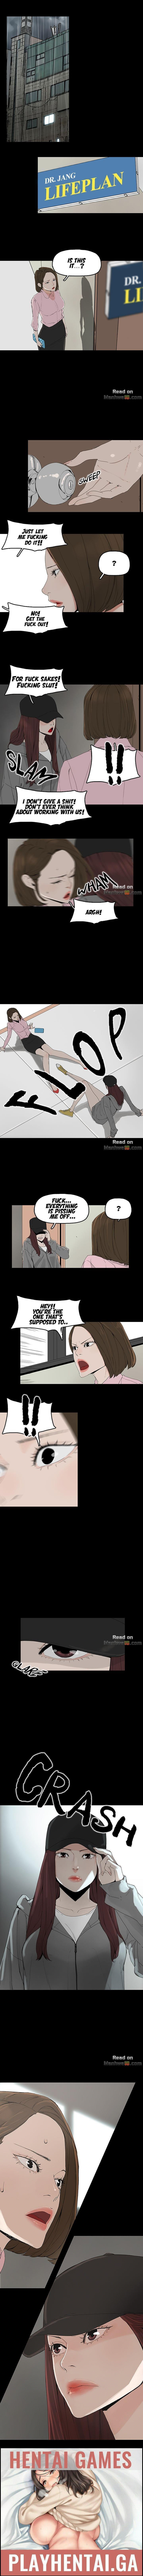 Marido SURROGATE MOTHER Ch. 1 Vip - Page 8